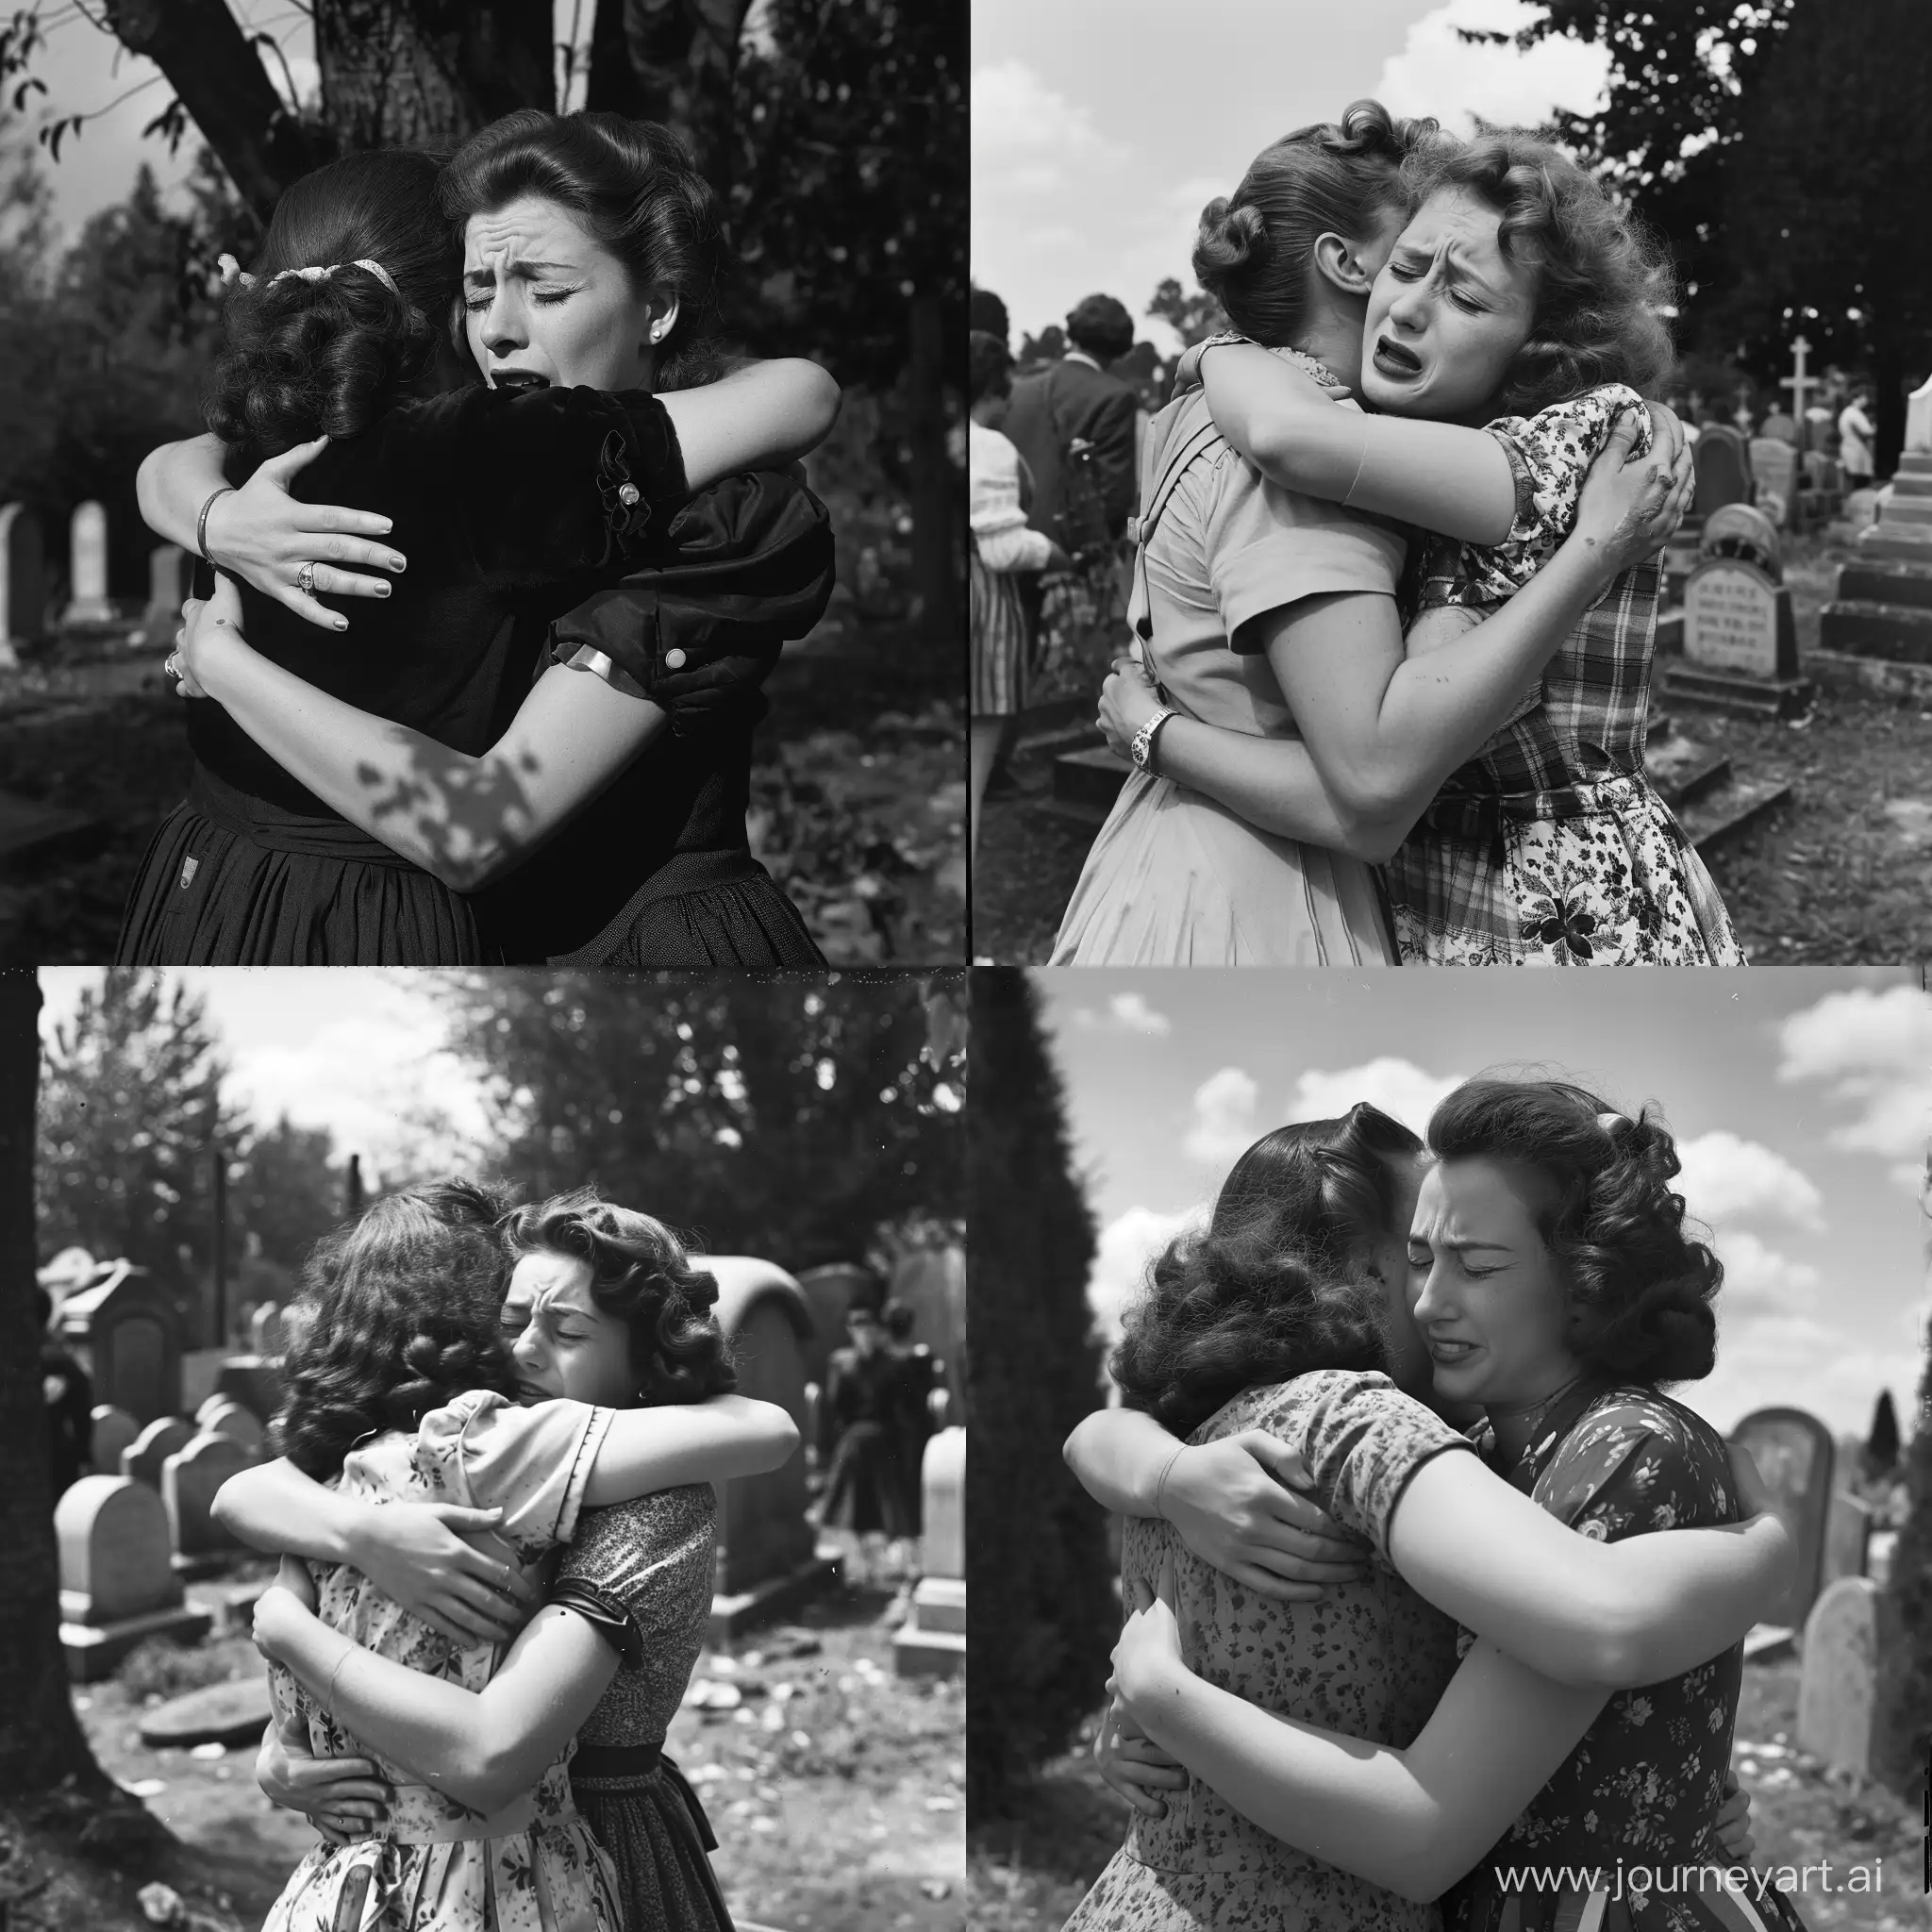 Emotional-Lesbian-Couple-Embracing-in-1950s-French-Cemetery